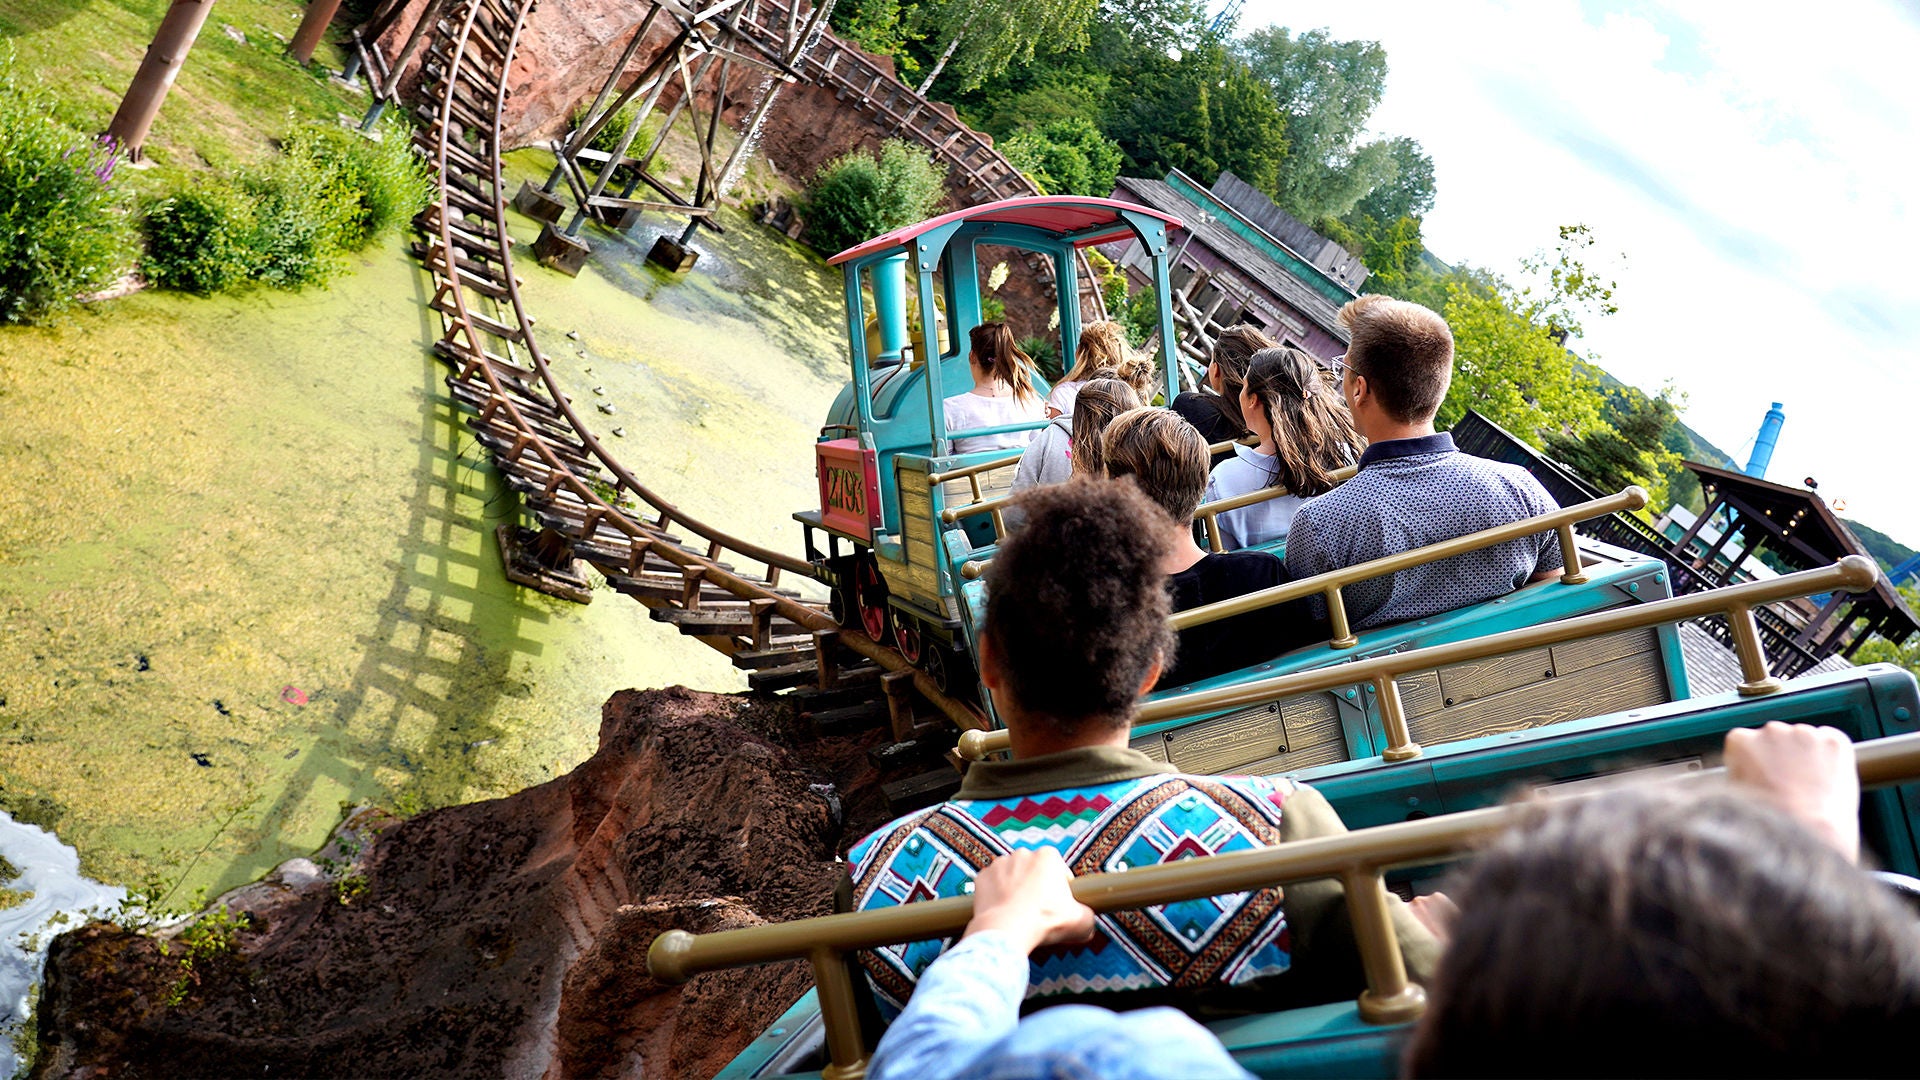 -15% off on the dated tickets for Walibi Belgium